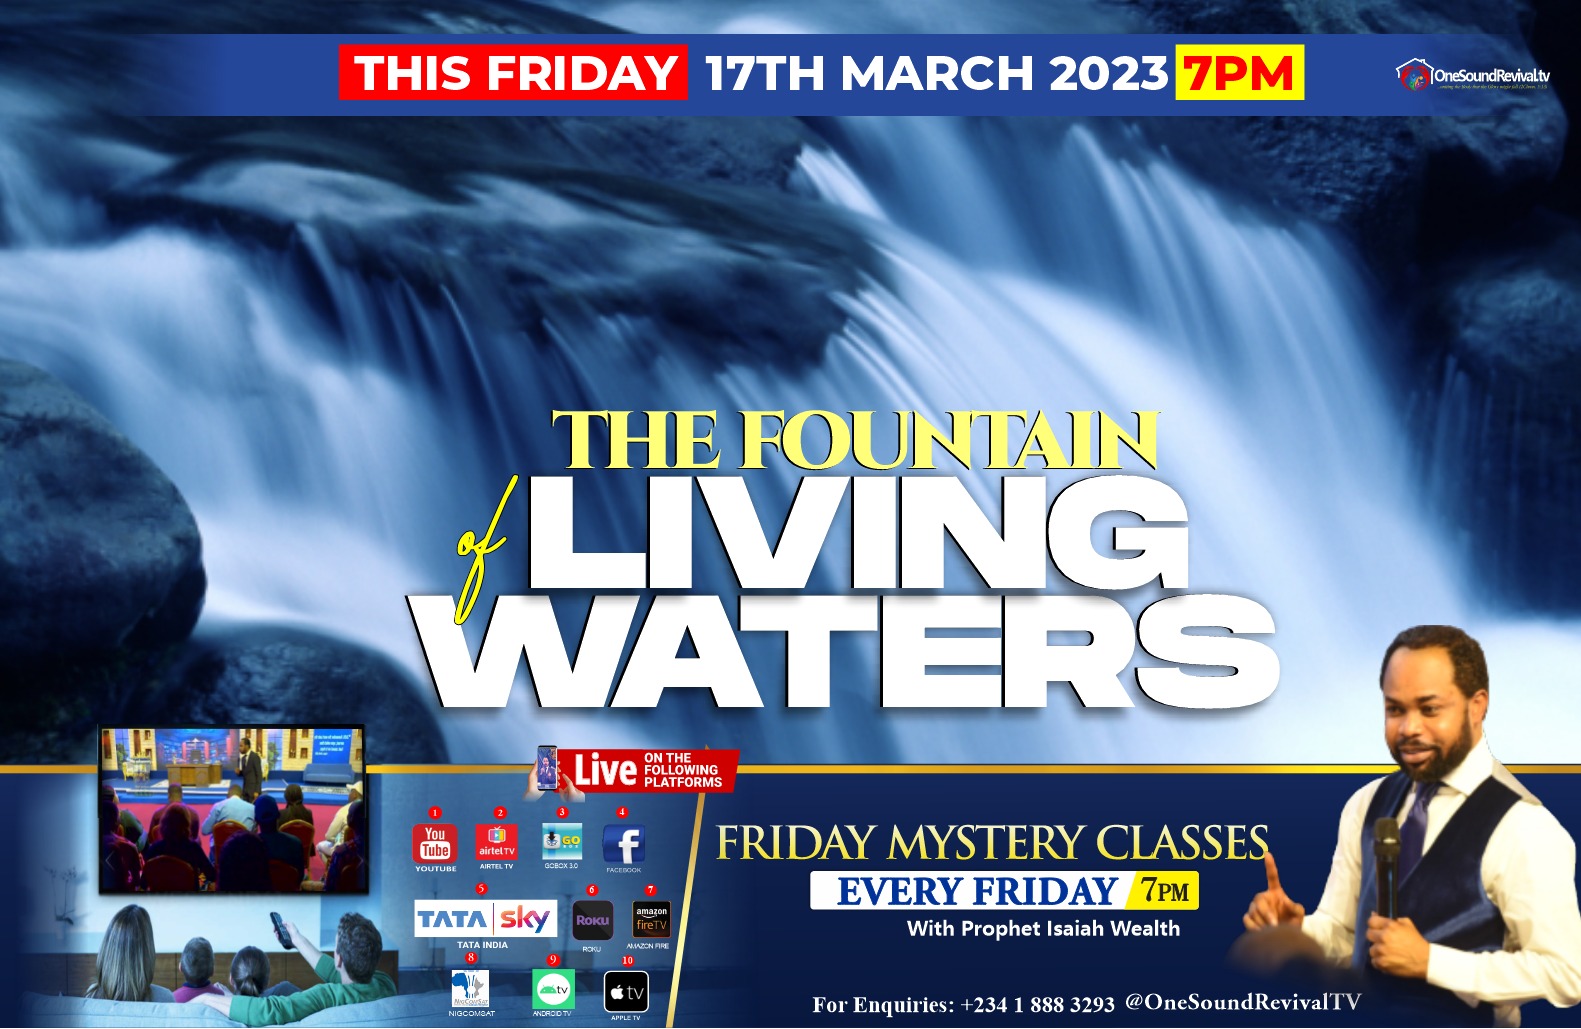 THE FOUNTAIN OF LIVING WATERS